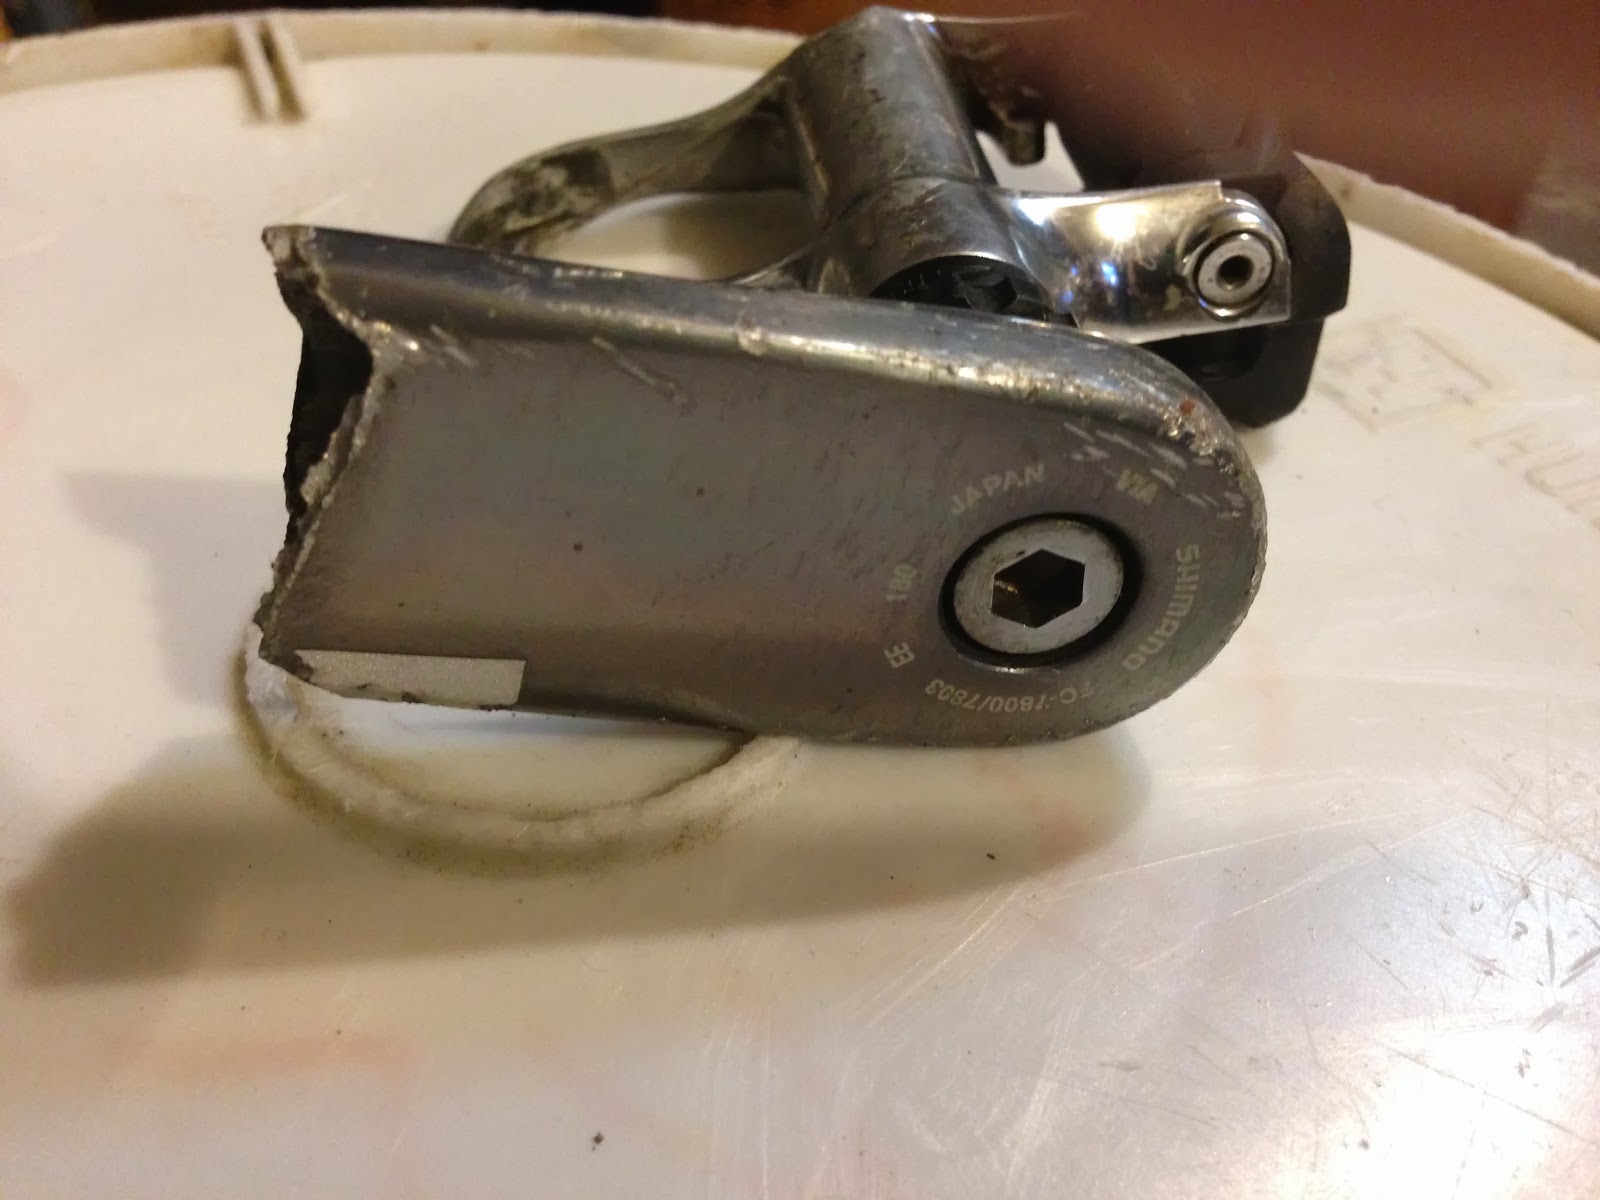  Broken Off Crank Arm with Pedal